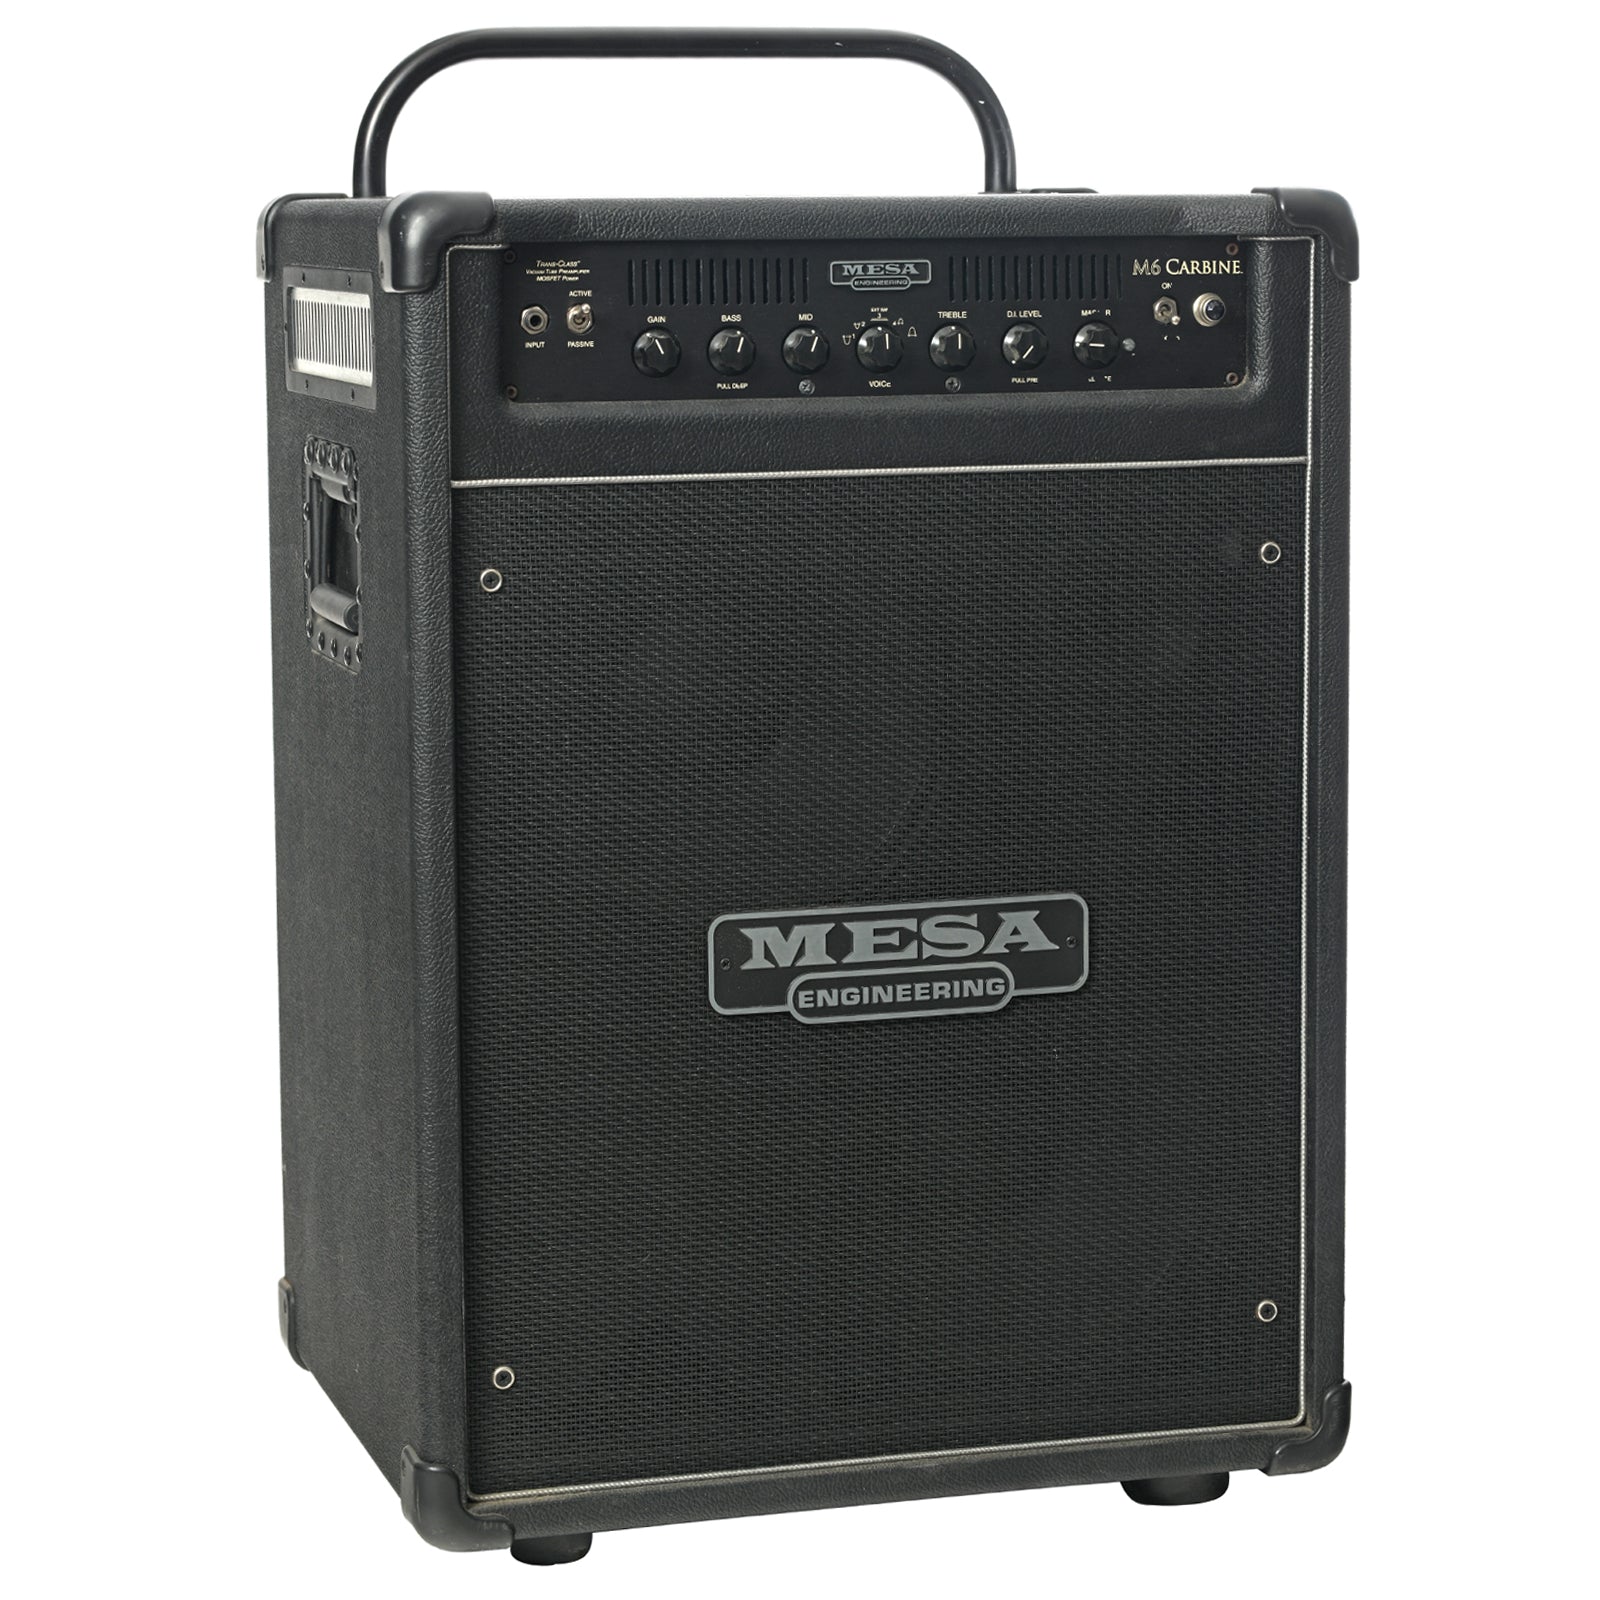 Front and side of Mesa Boogie M6 Carbine Bass Combo